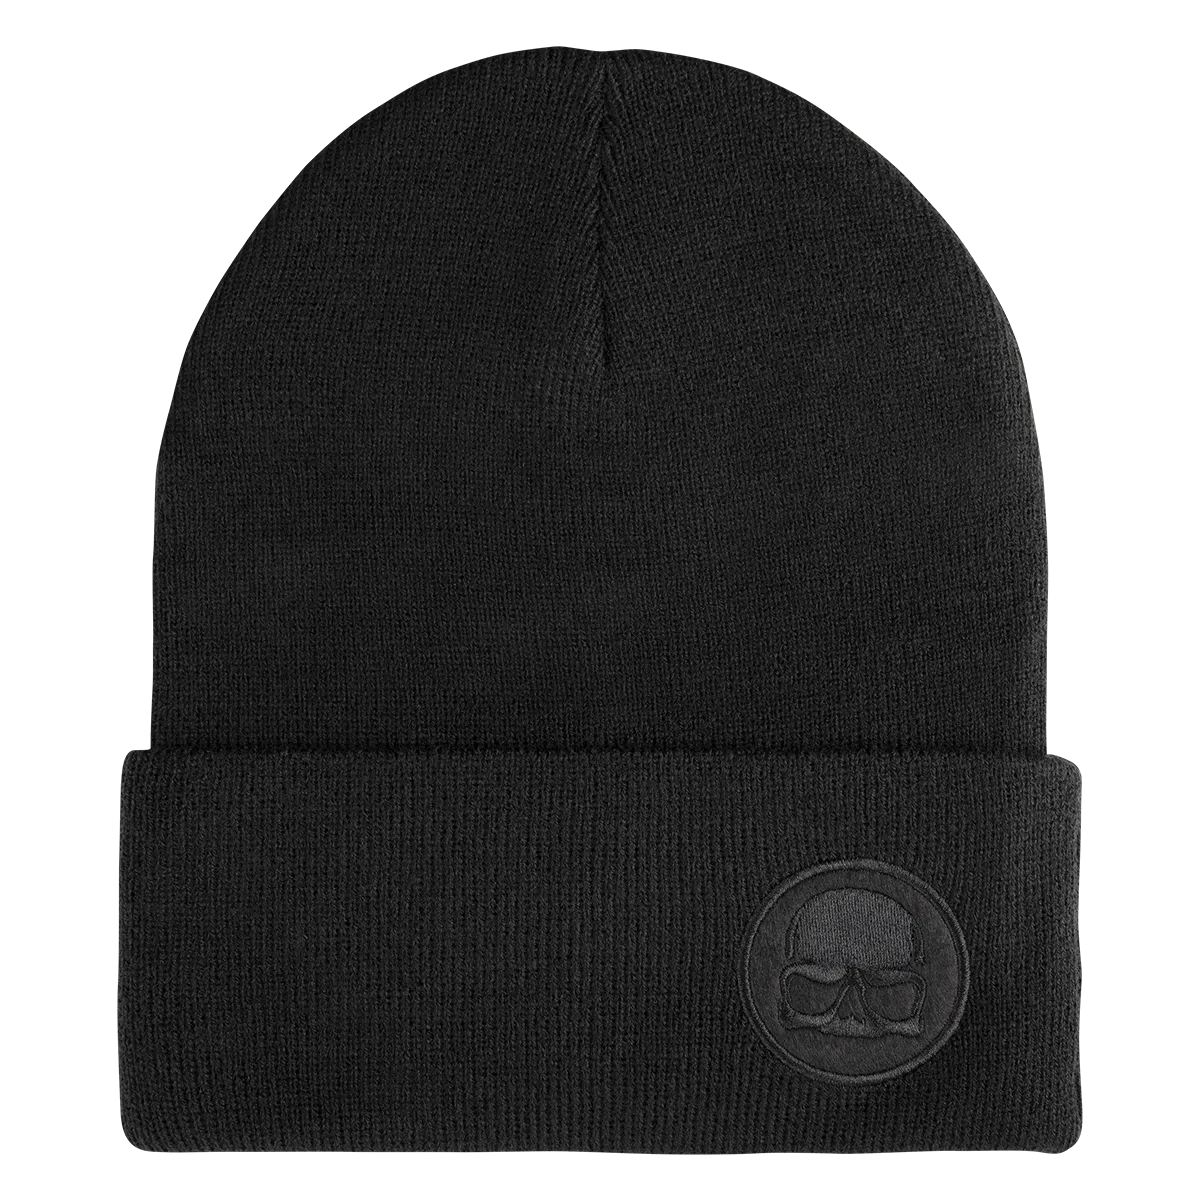 Call of Duty Beanie Hat "Stealth" Black Cover